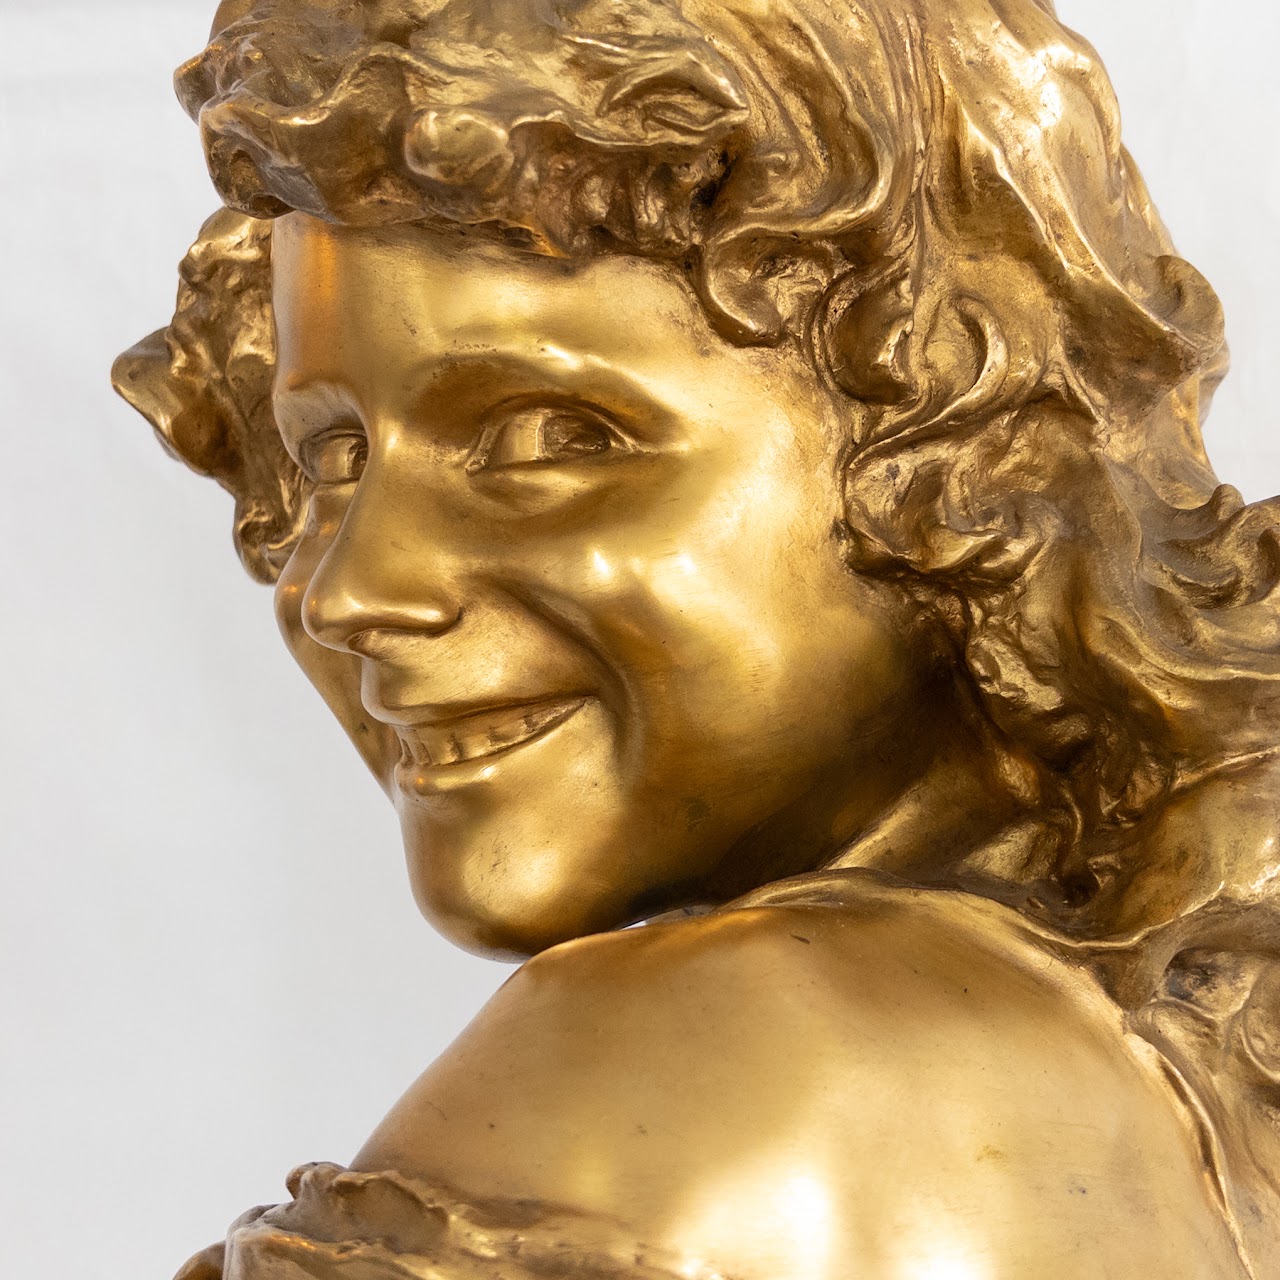 Jean Antoine Injalbert French Gilt Bronze and Marble Bust